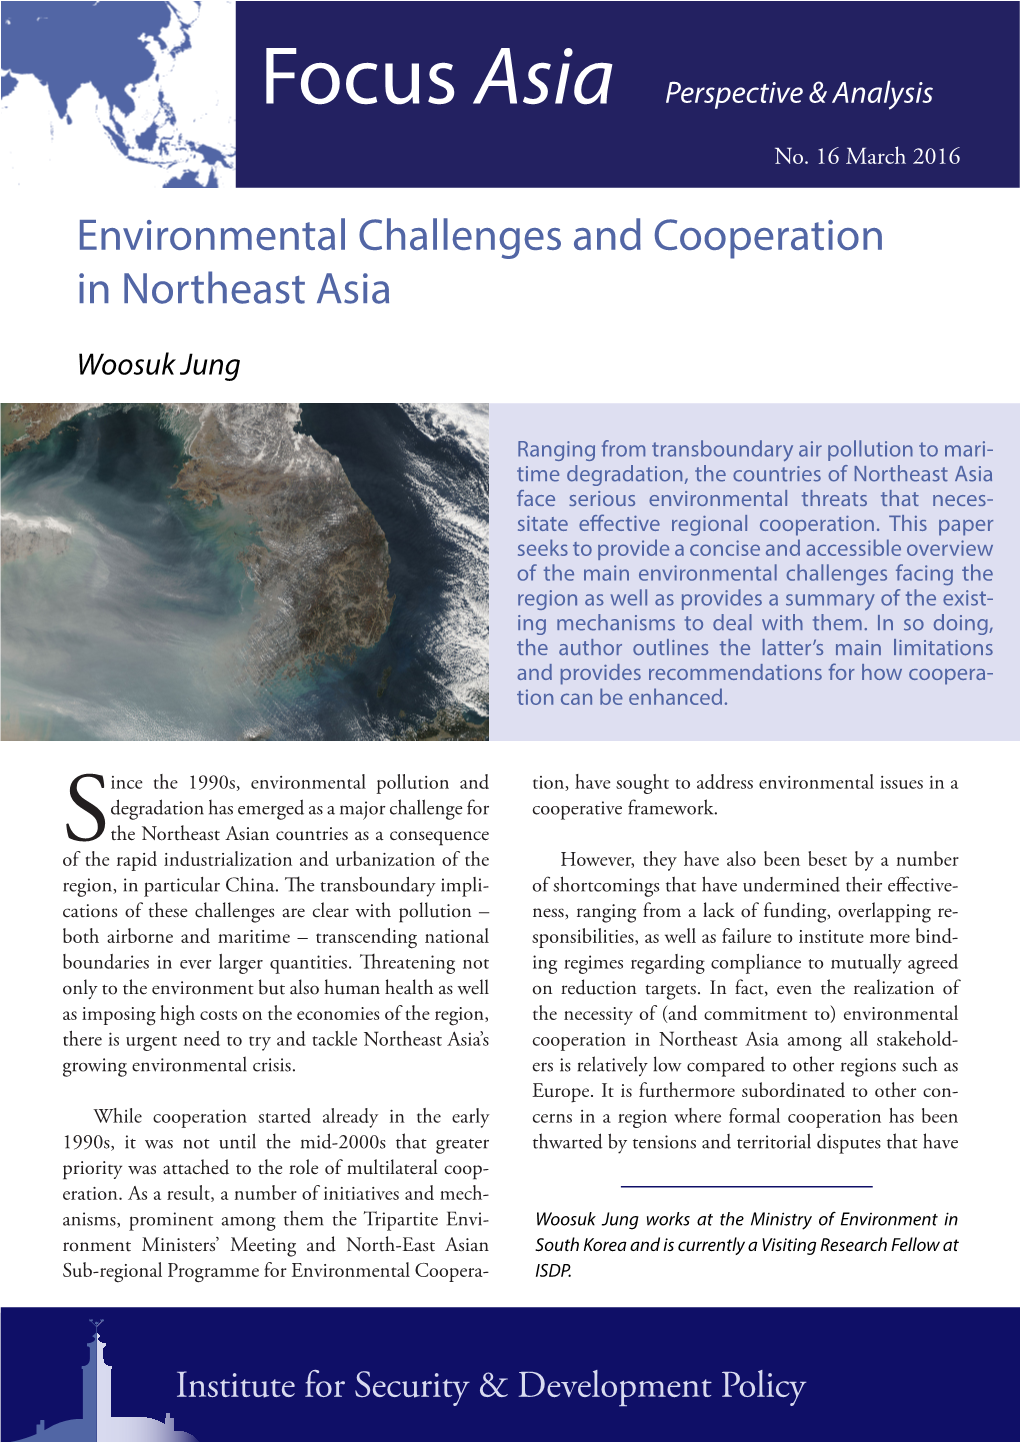 Environmental Challenges and Cooperation in Northeast Asia